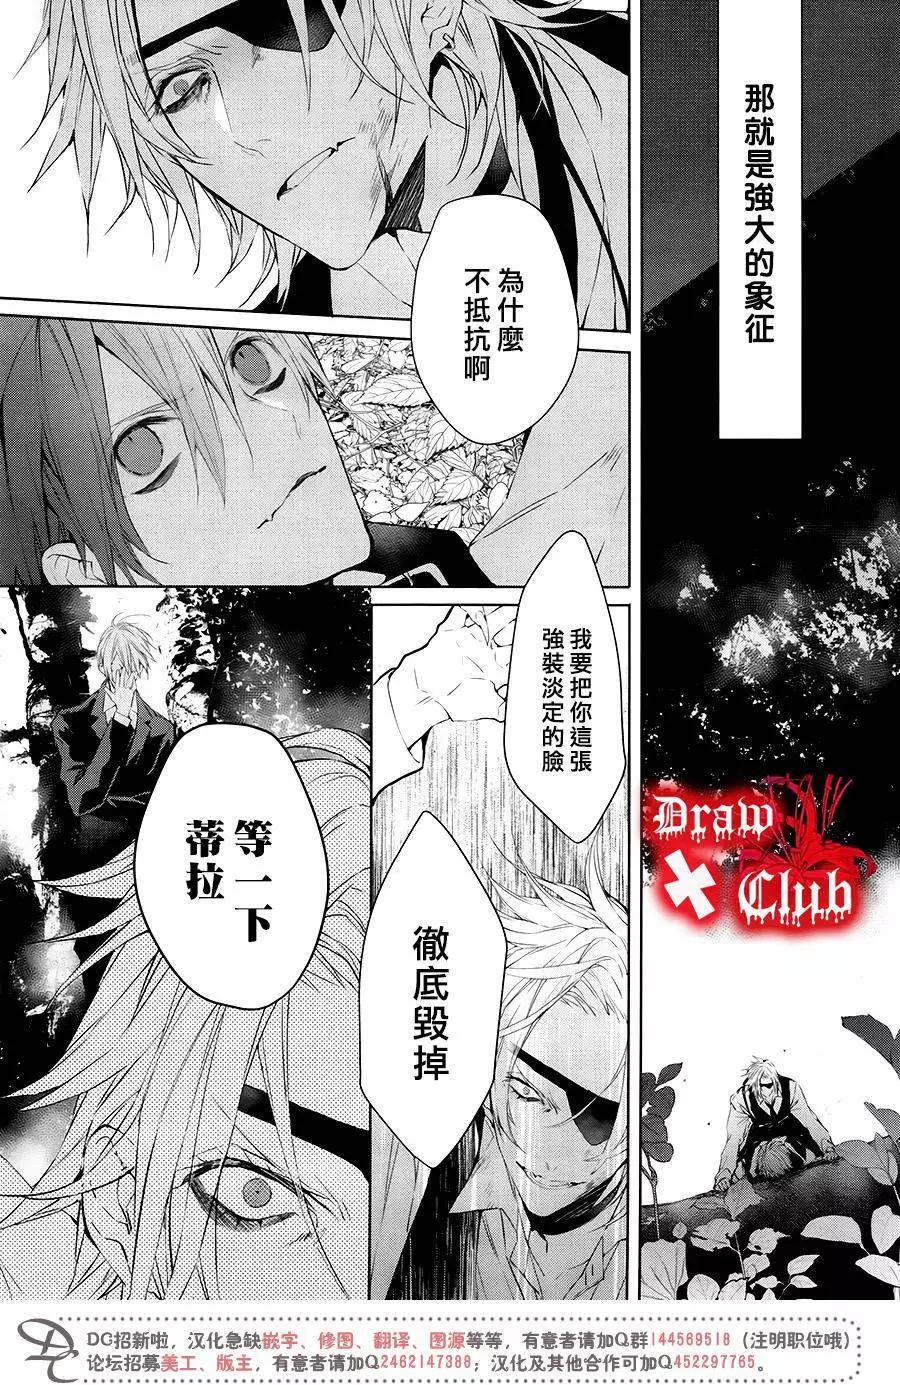 Bloody Mary - 第32回 - 5